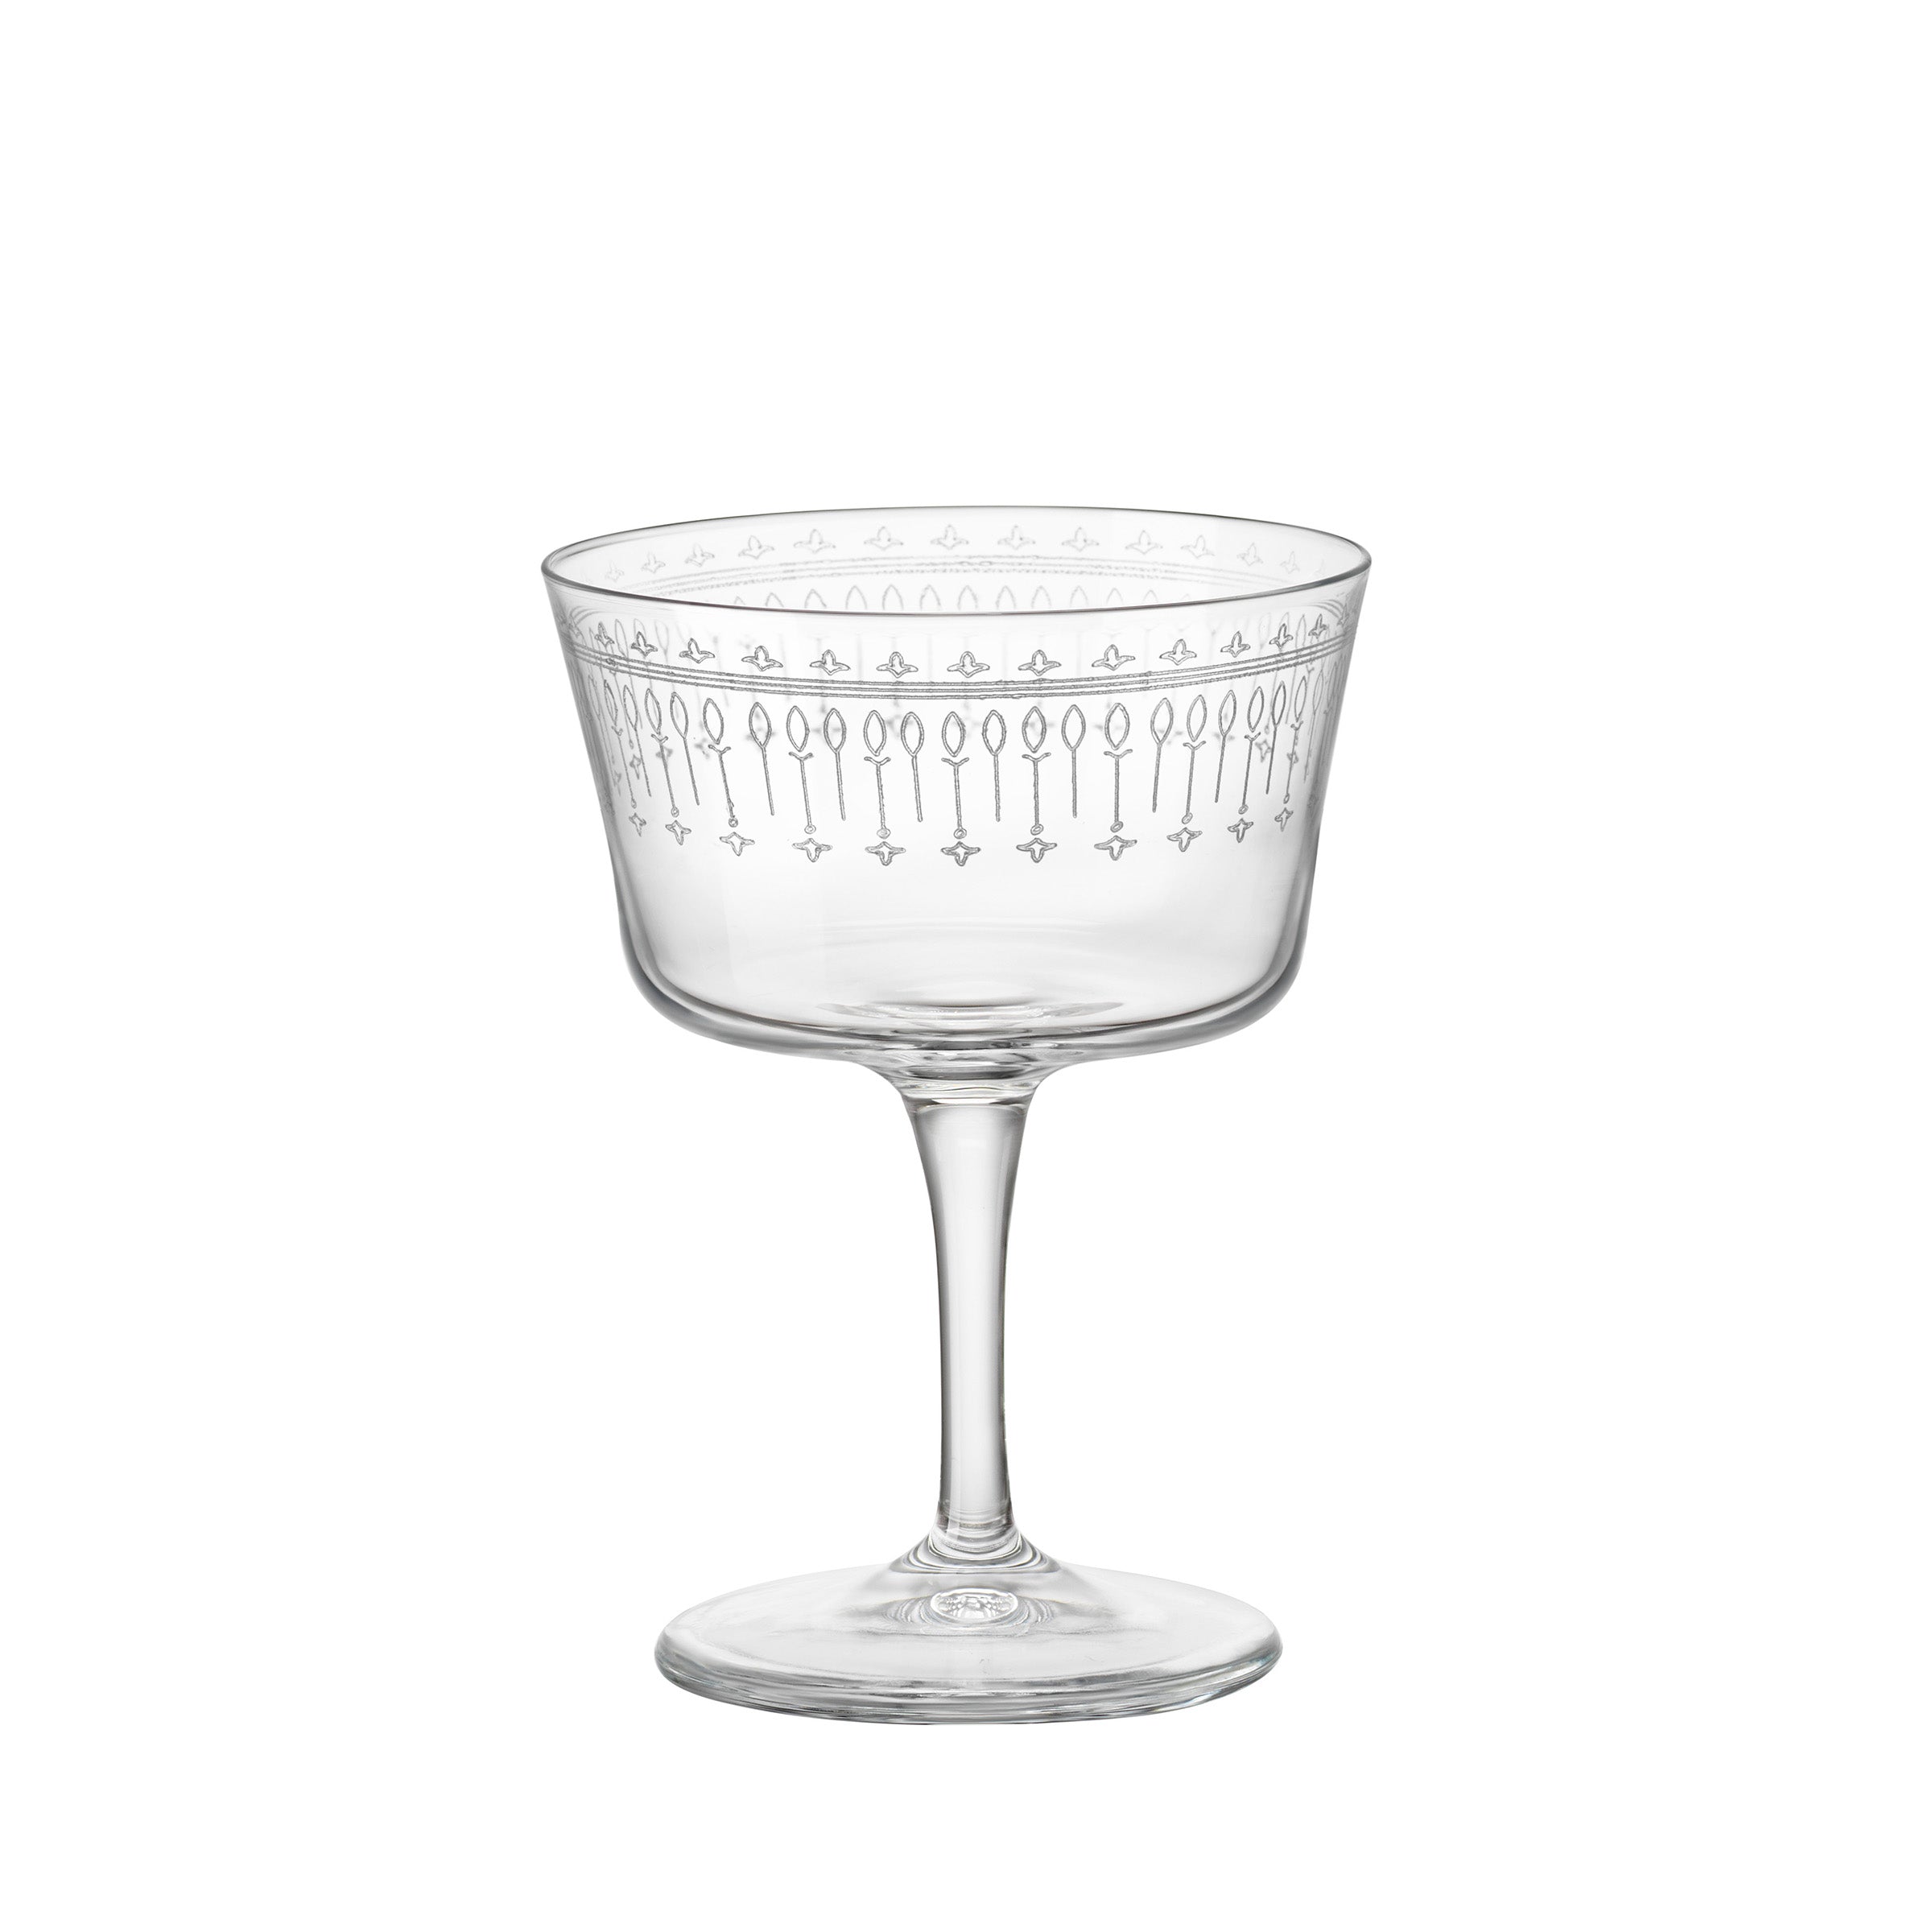 PARNOO Cocktail Glasses 8 Ounce - Set of 8 Seamless